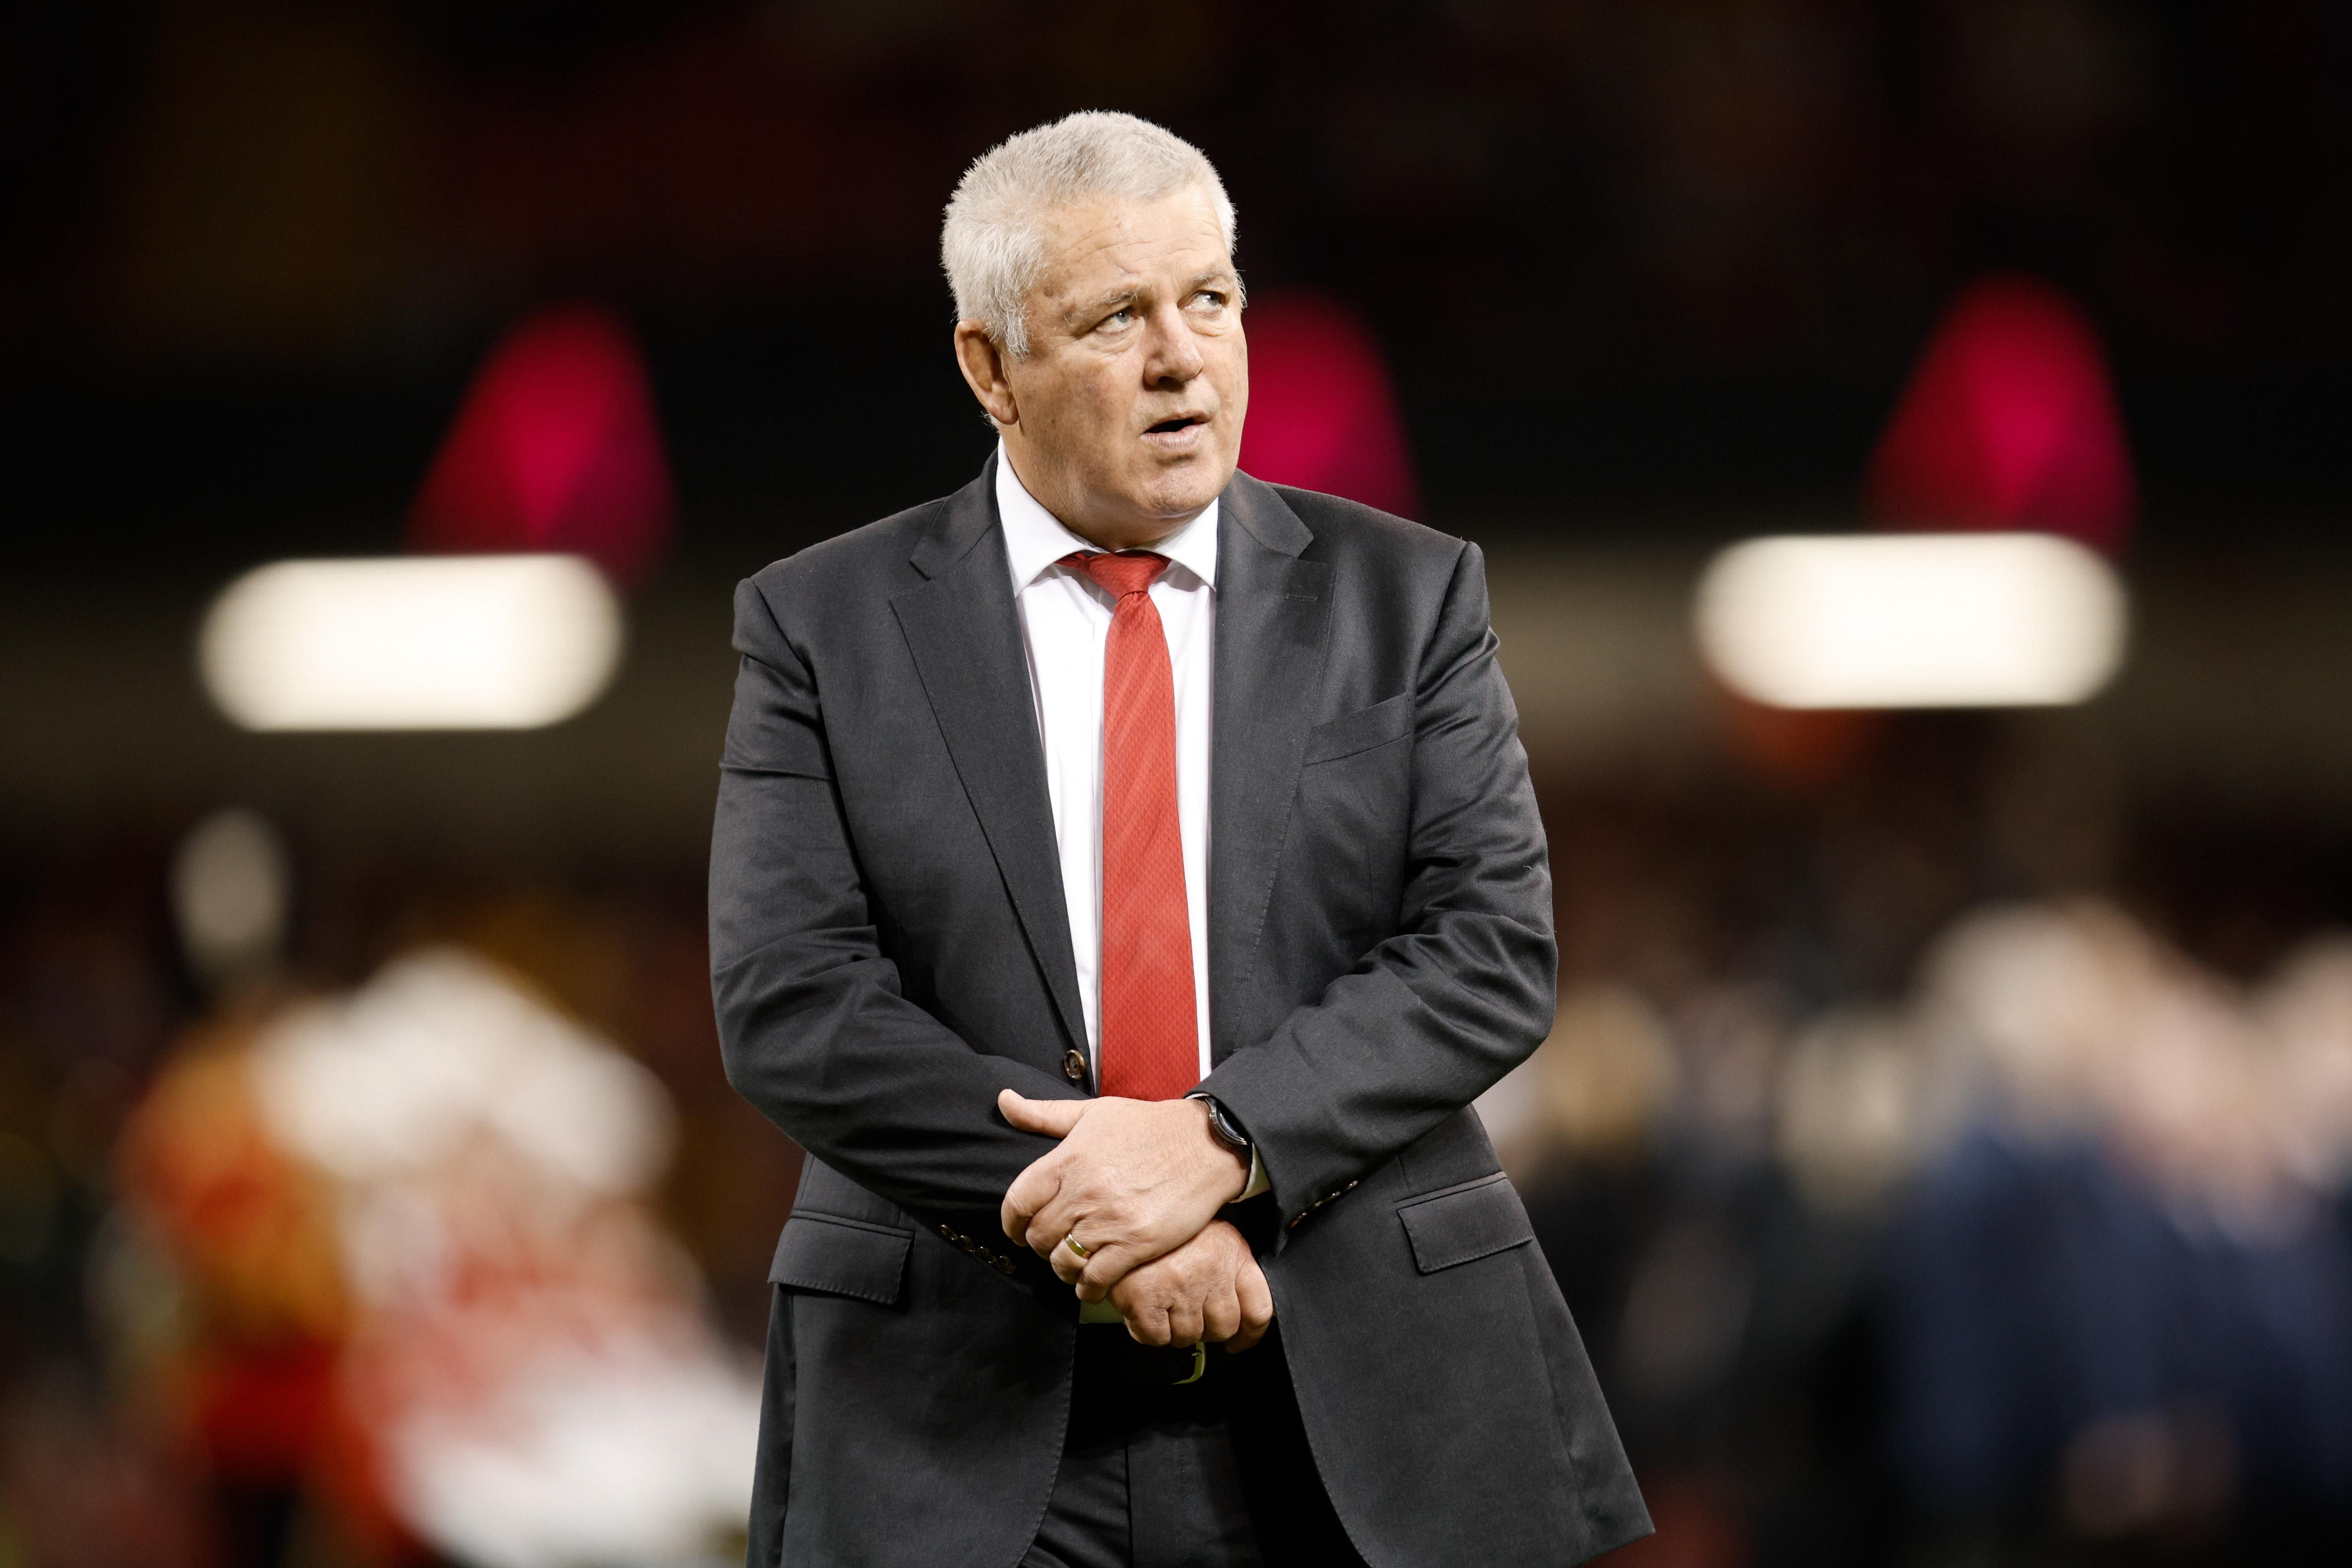 Warren Gatland’s resignation offer rejected after Wales’ Six Nations defeat